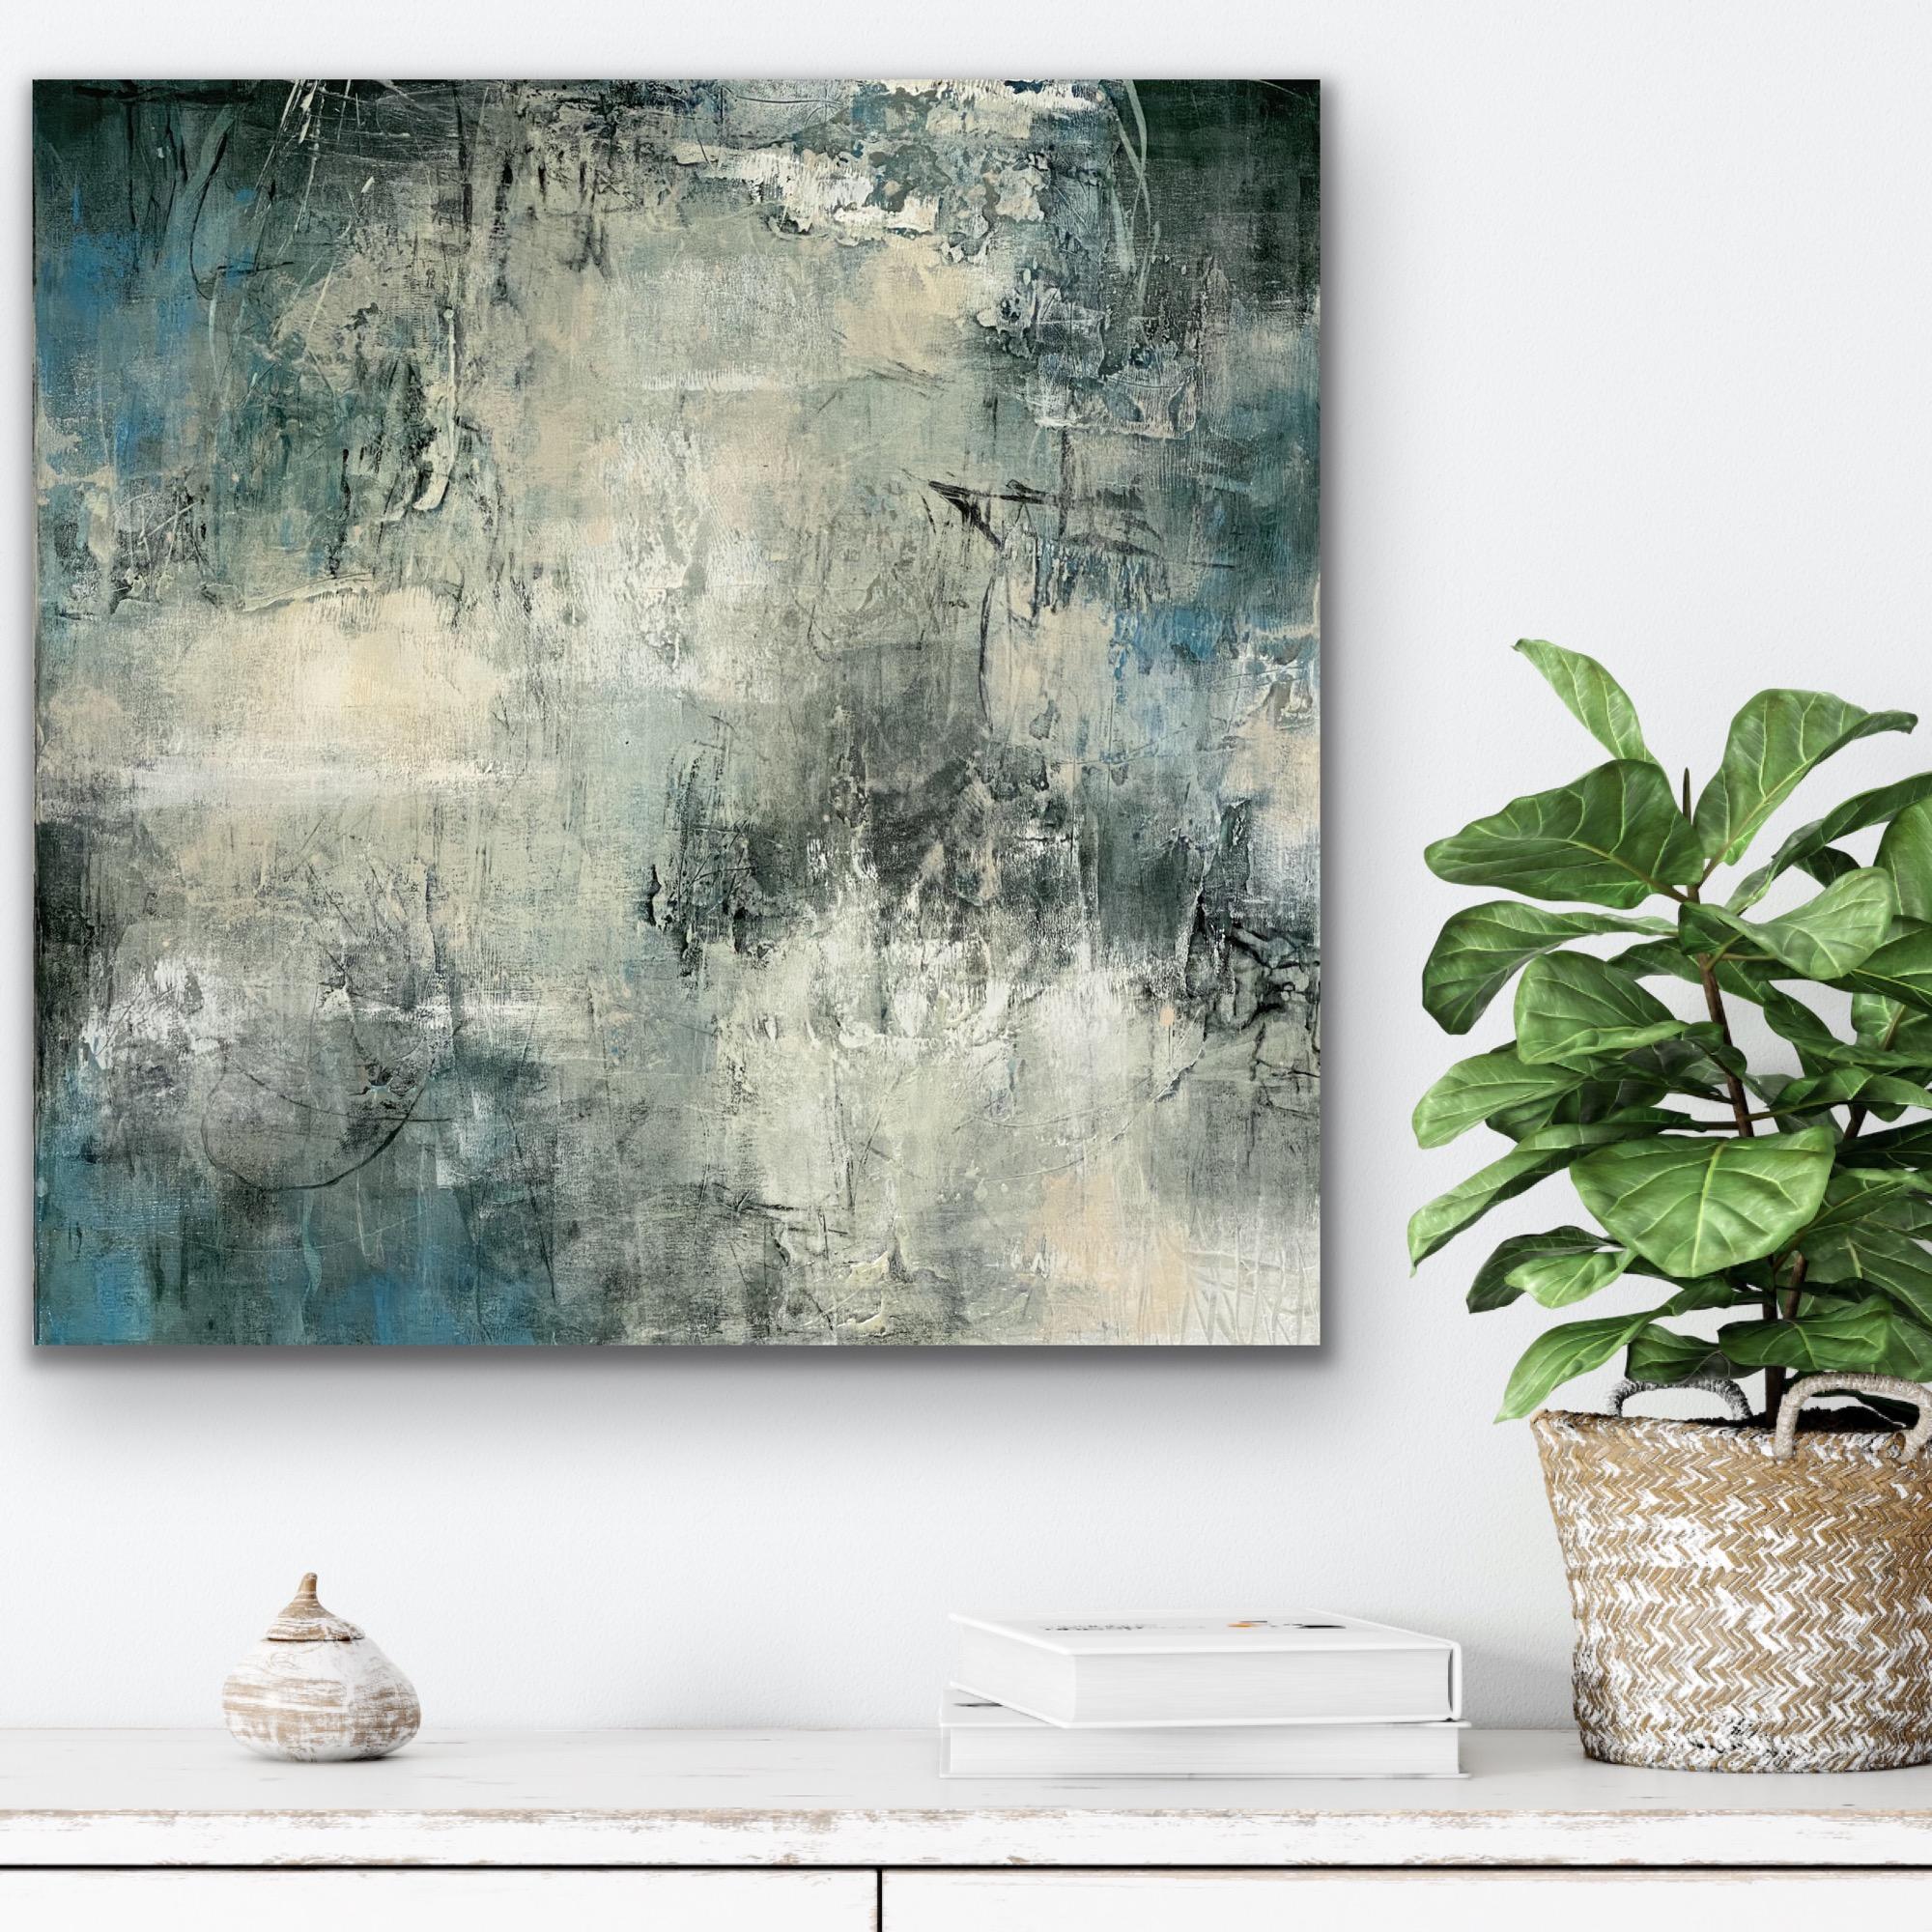 Depth and duration,  Abstract expressionism, blue, 2020, Acrylic on canvas - Gray Landscape Painting by Juanita Bellavance 